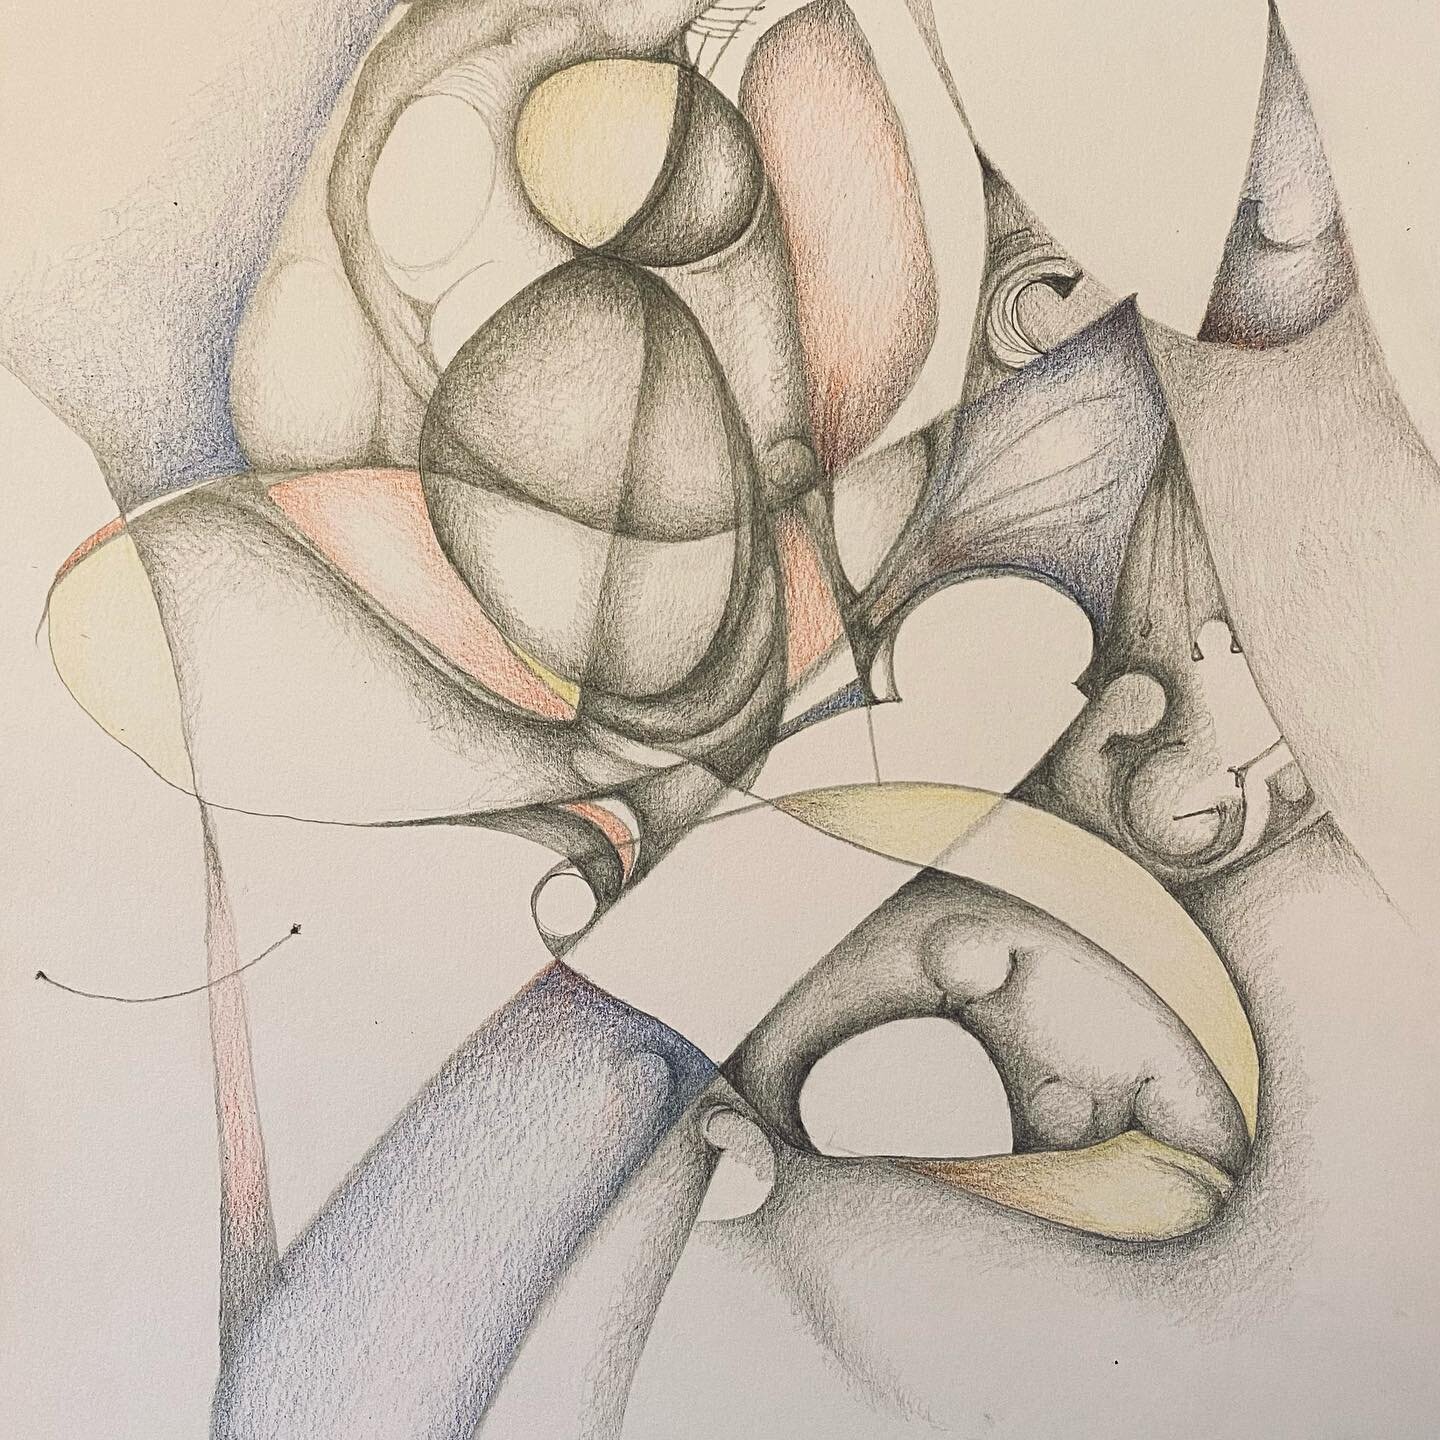 I drew this over several days in this beautiful place with waves breaking and birds calling. I wonder about the influence of the landscape on my abstract drawing. If you have any insights about the connections, please share them. #contemporaryartist 